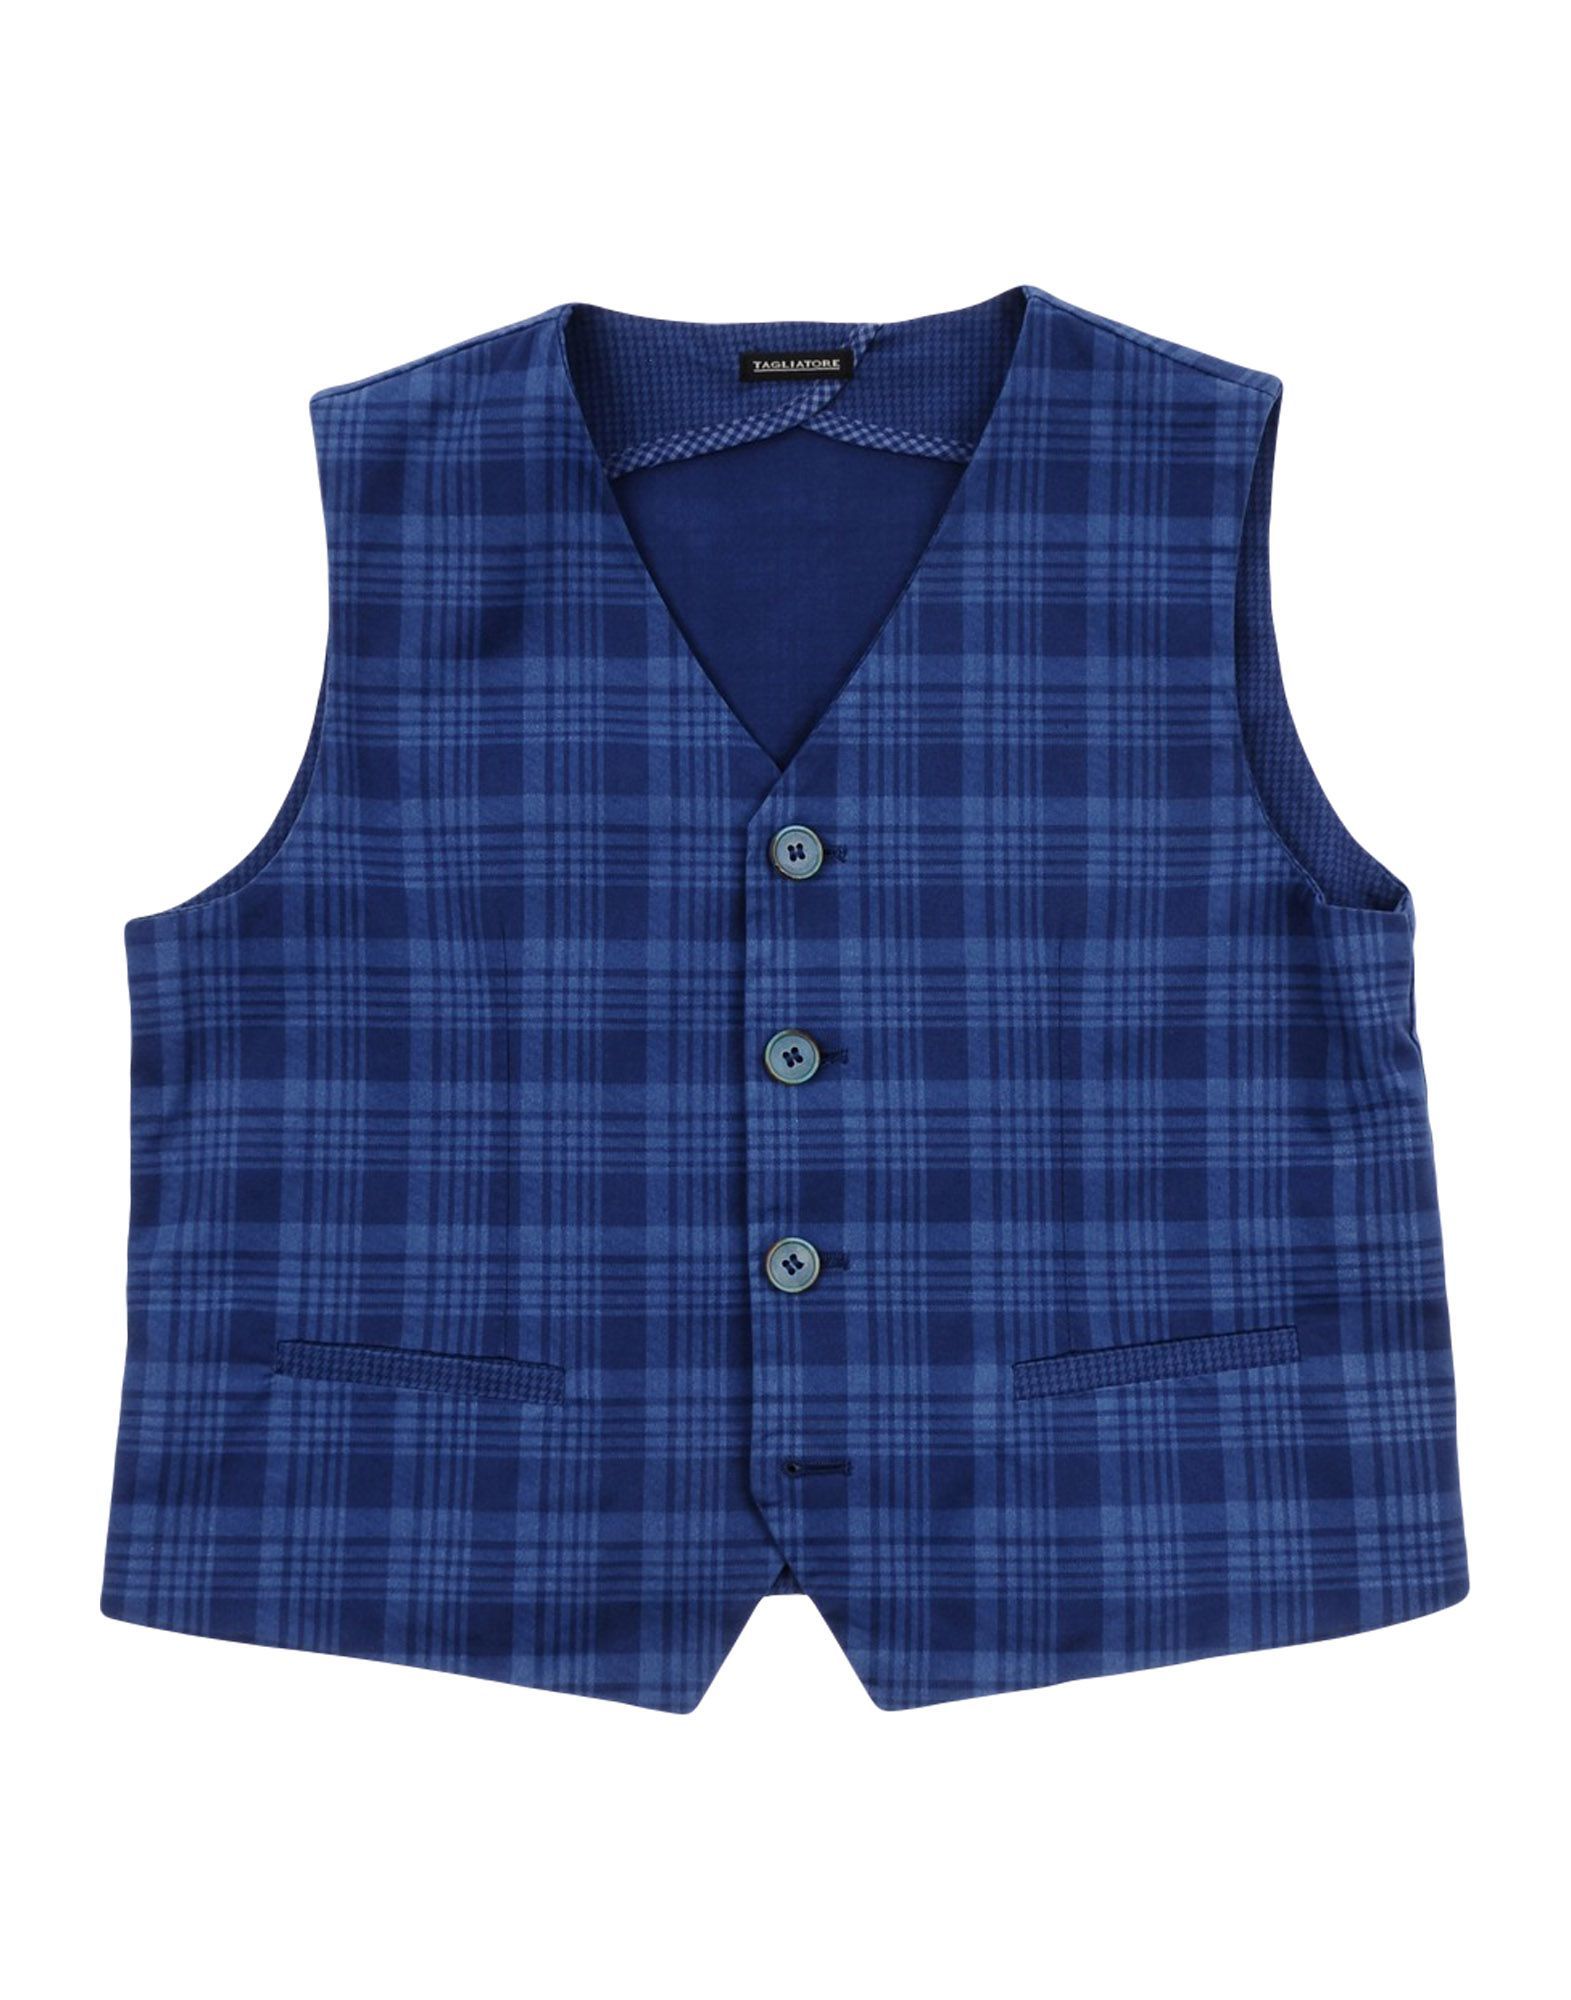 plain weave, no appliqu�s, tartan pattern, multipockets, 4 buttons, v-neckline, single-breasted , sleeveless, wash at 30� c, dry cleanable, iron at 110� c max, do not bleach, do not tumble dry, semi-lined, stretch, button closing waistcoat